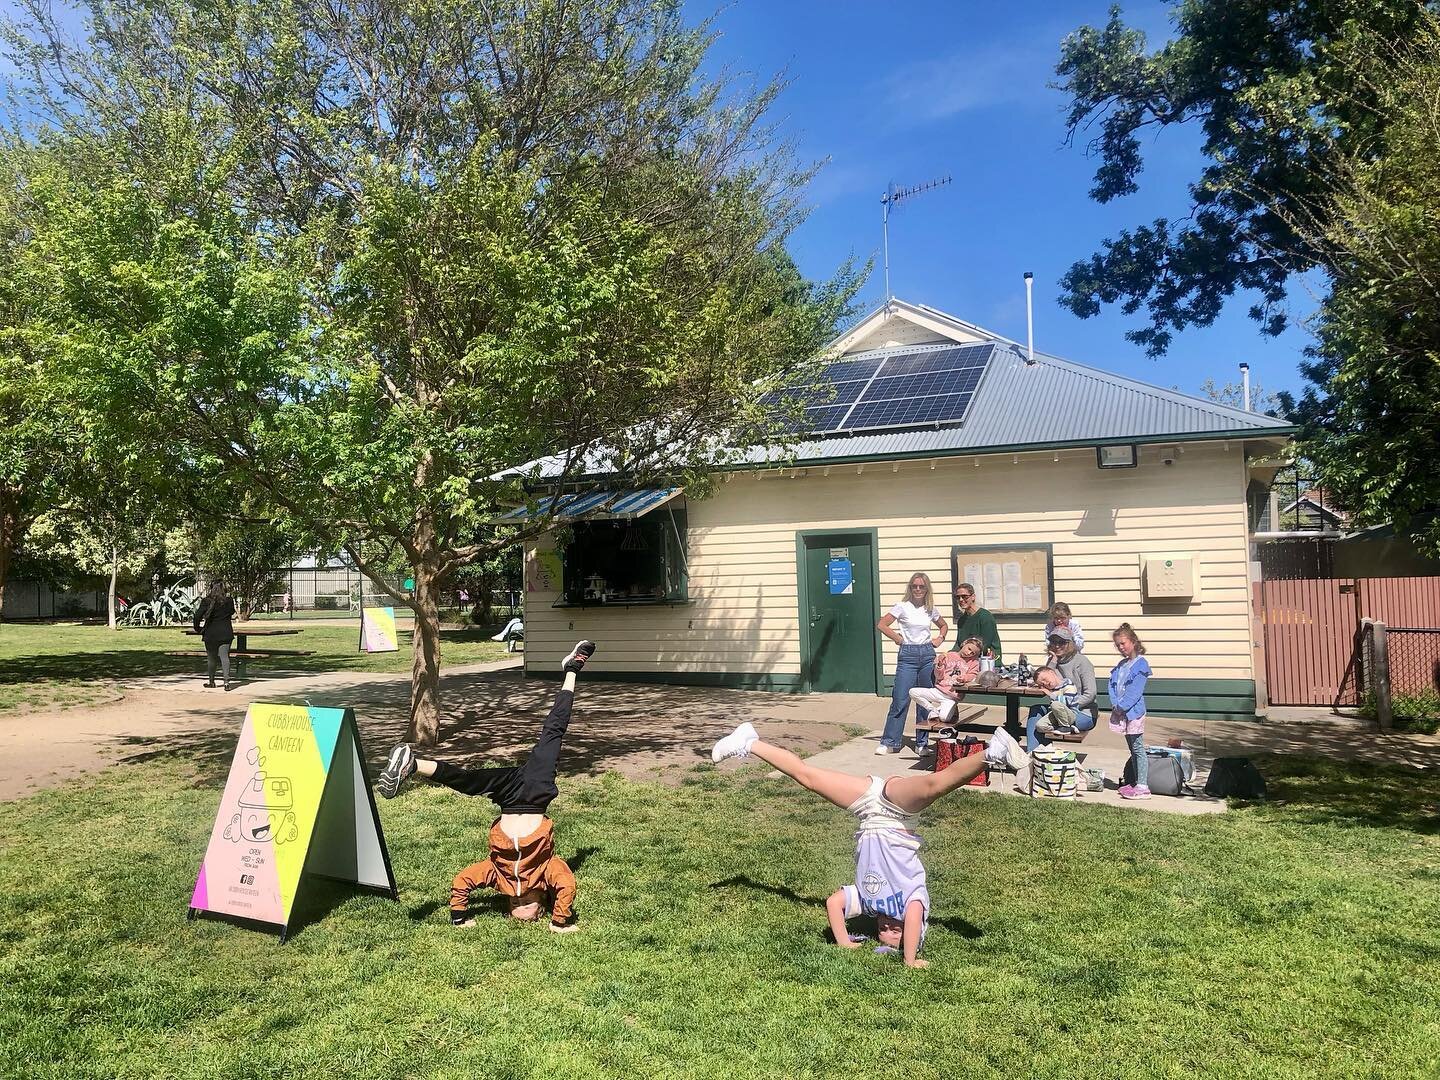 School holiday things @cubbyhousecanteen 🤸🏻🤸&zwj;♀️

#today #sunshine #goodvibes #friends #play #exercise #outdoorplay #community #lunchdates #playmates #kids #spring #fun #siblings #freshair #melbourneplaygrounds #cafeinapark #seeyouatthepark #co